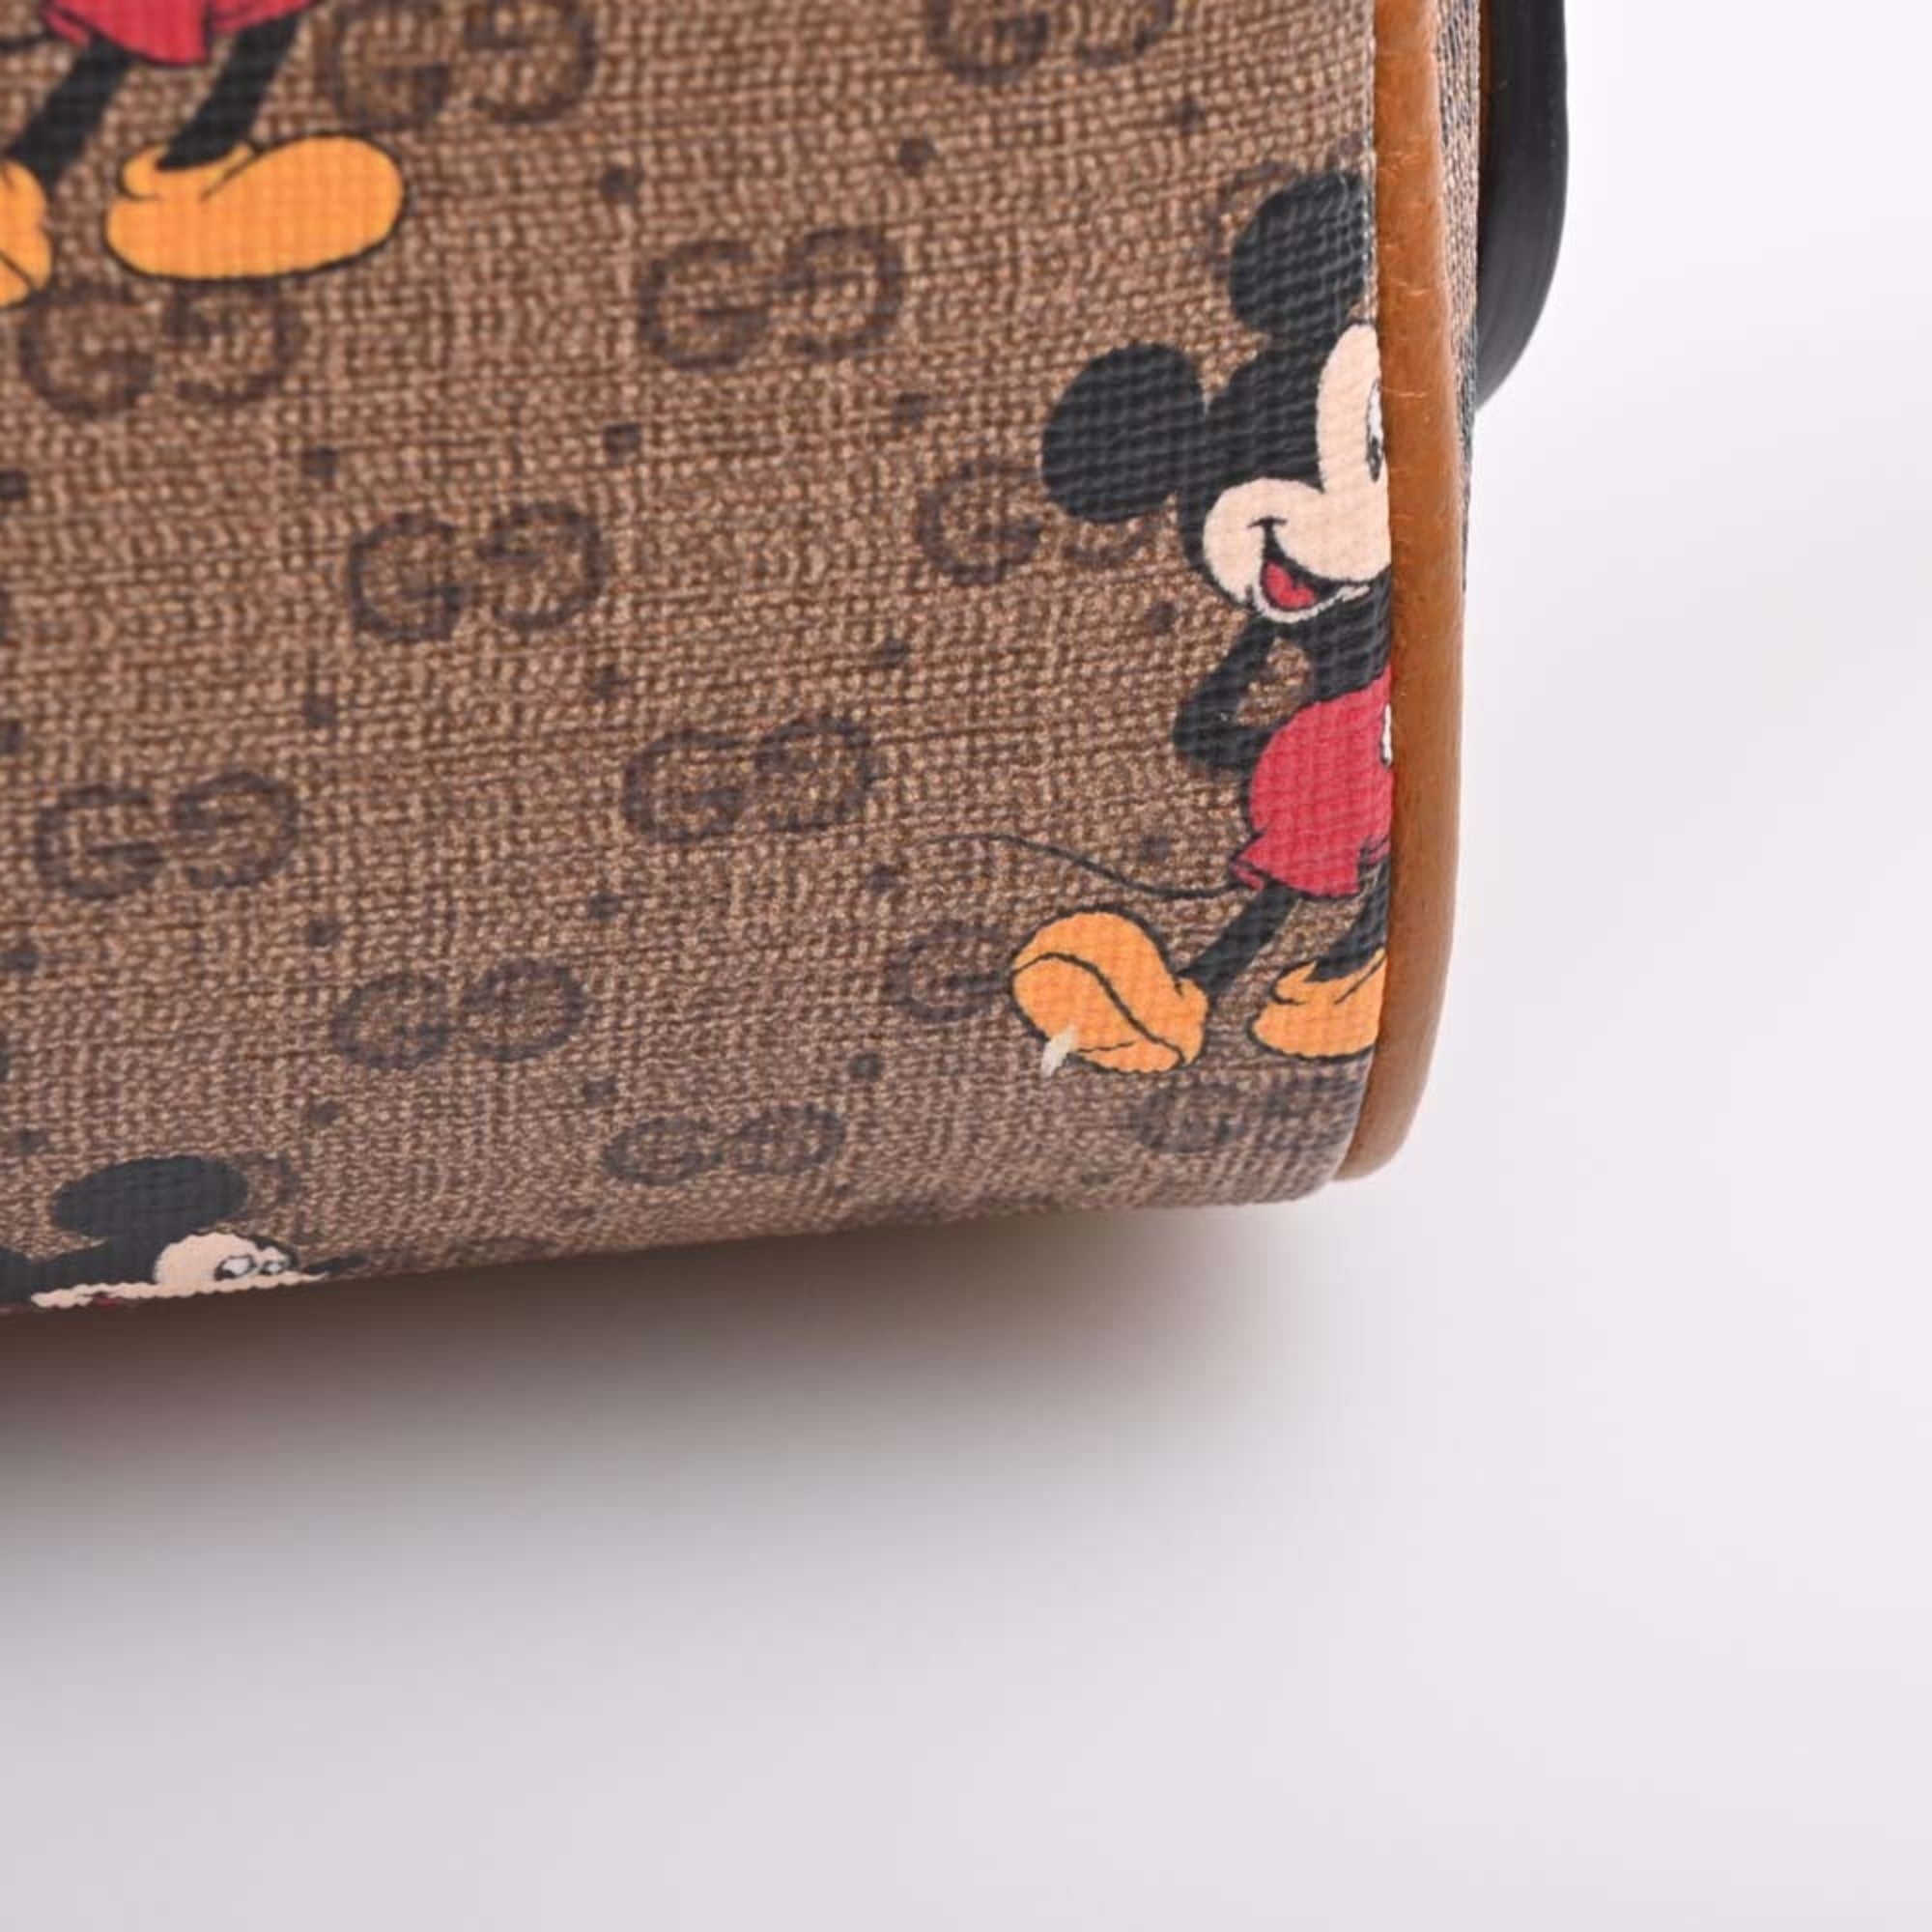 STYLE Edit: Gucci teams up with Disney for Mickey Mouse bags to mark icon's  90th anniversary | South China Morning Post